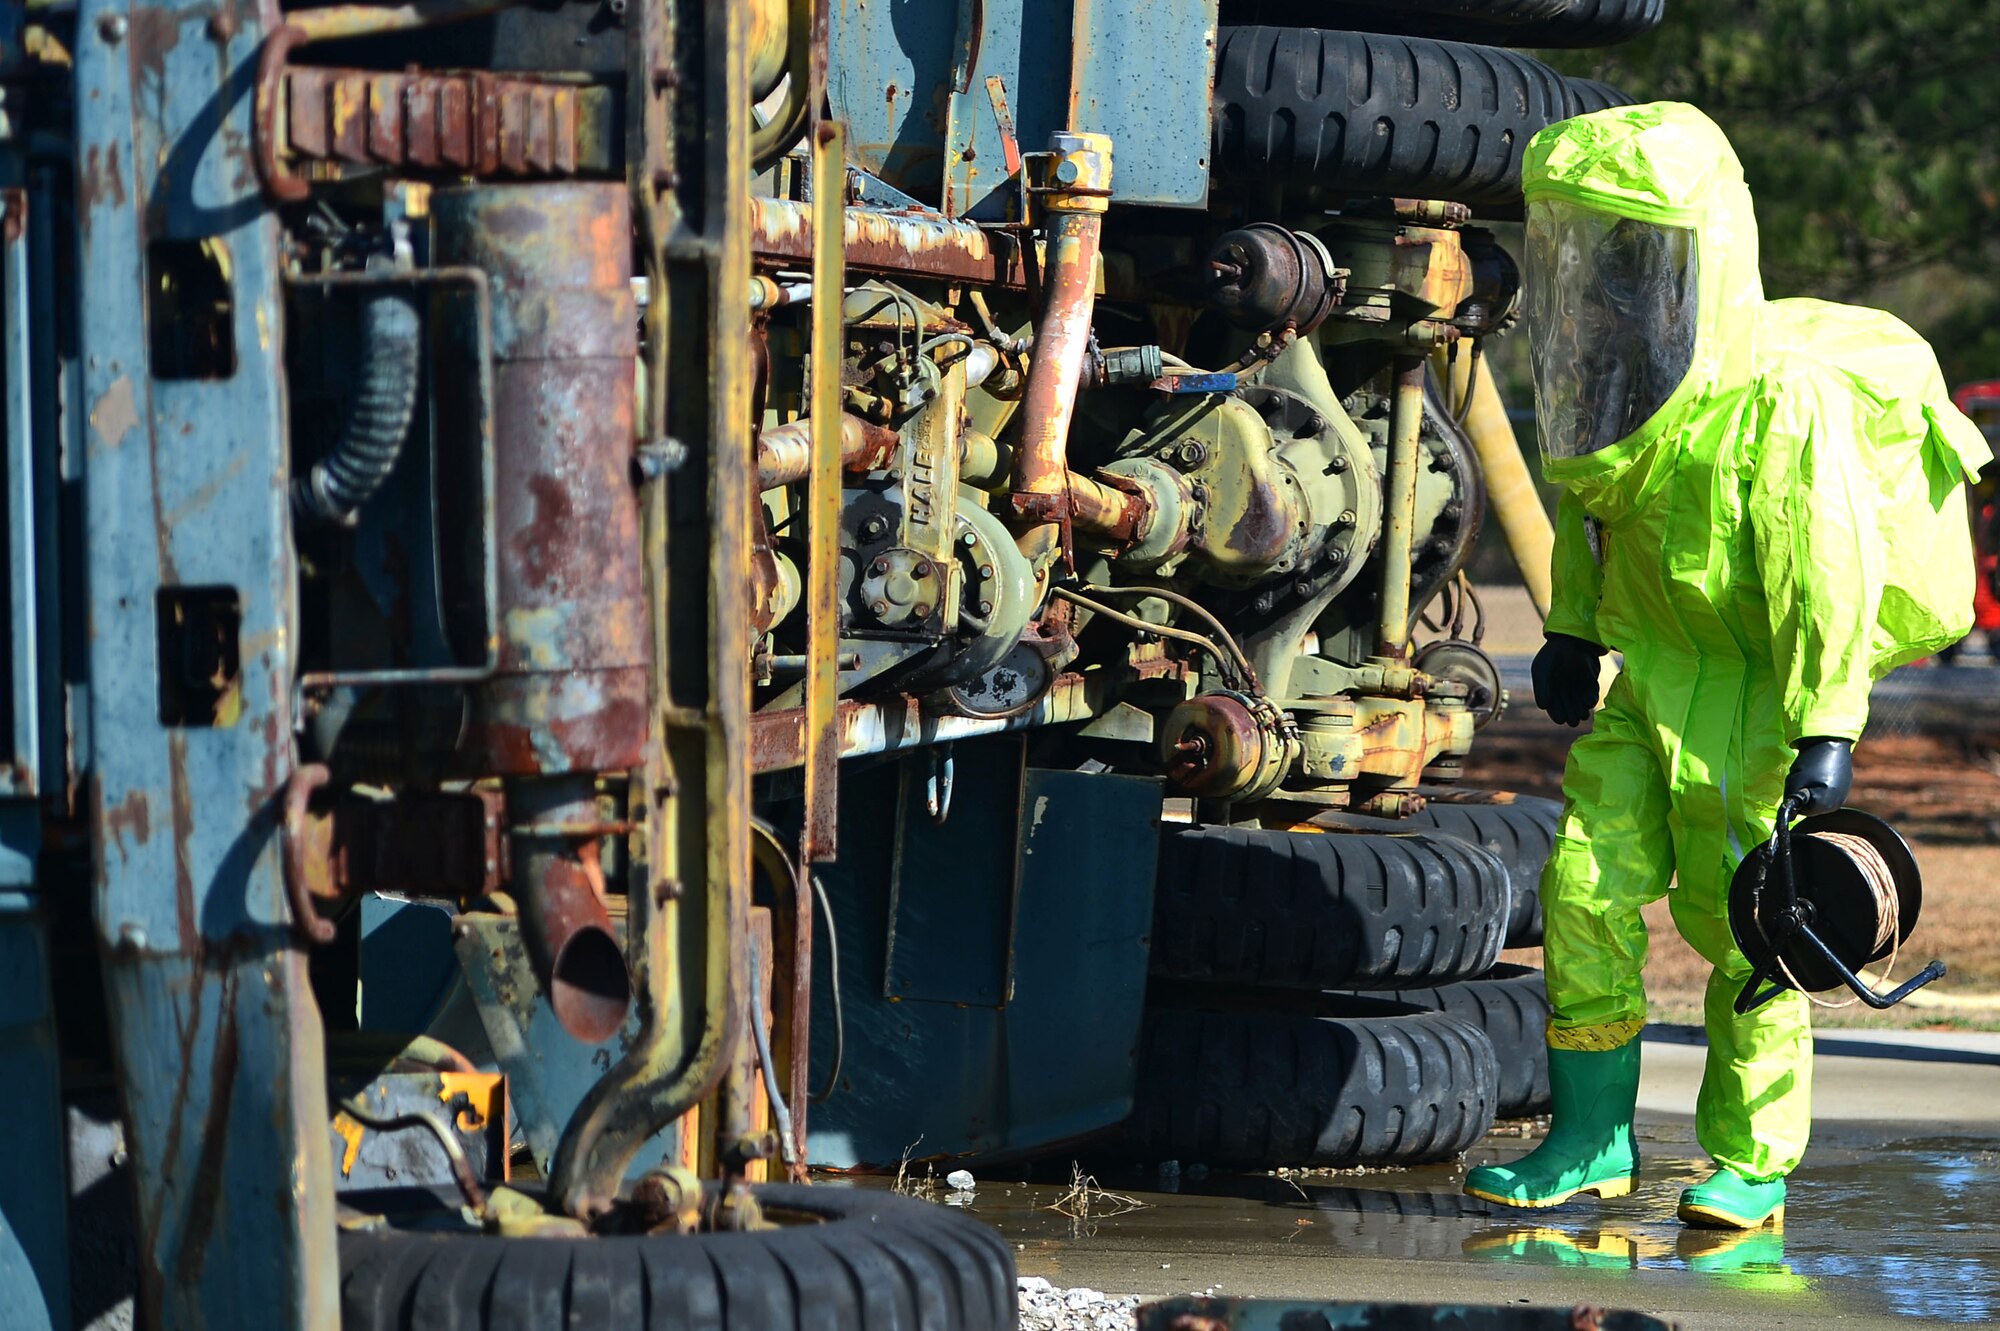 U.S. Air Force Staff Sgt. Andrew Wright, 20th Civil Engineer Squadron explosive ordnance disposal (EOD) technician, inspects a simulated chemical spill site for explosives during a hazardous material training at Shaw Air Force Base, S.C., Jan. 19, 2017. Airmen assigned to the 20th CES EOD flight were tasked with examining the site for explosives using a medium-sized robot followed by an in-person inspection to clear the scene for Airmen from the 20th CES fire department and emergency management flight and 20th Aerospace Medicine Squadron bioenvironmental flight. (U.S. Air Force photo by Airman 1st Class Christopher Maldonado)